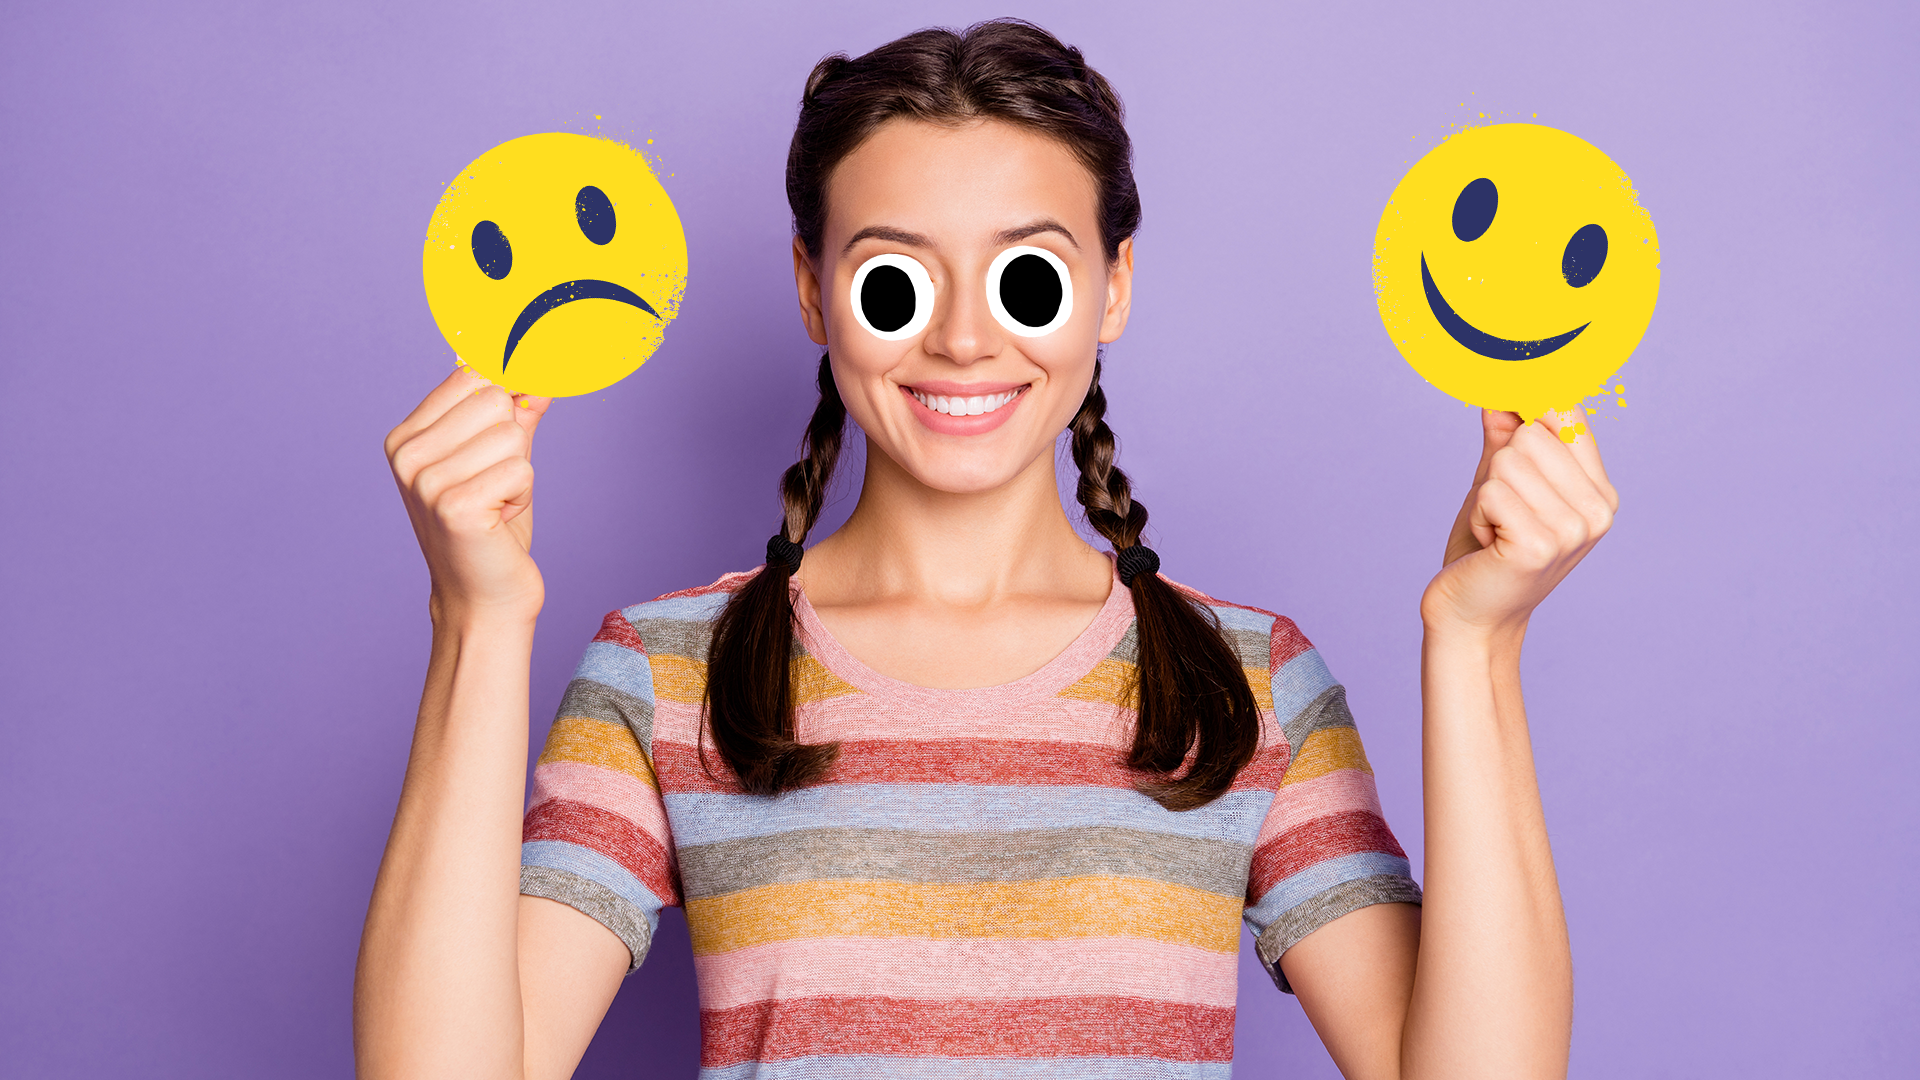 Woman on purple background with happy and sad emojis 